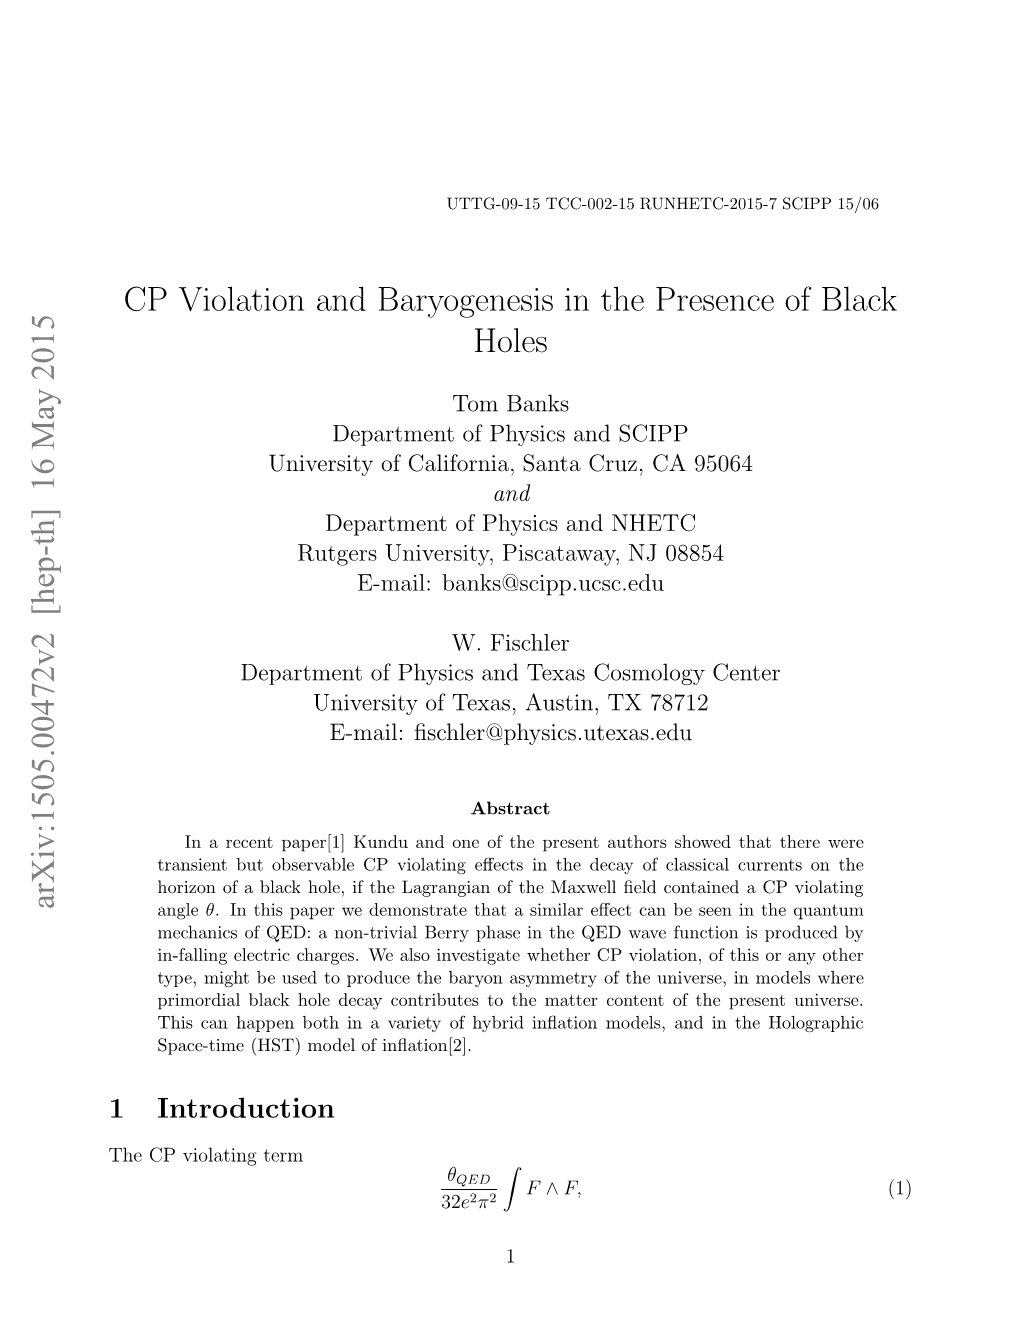 CP Violation and Baryogenesis in the Presence of Black Holes